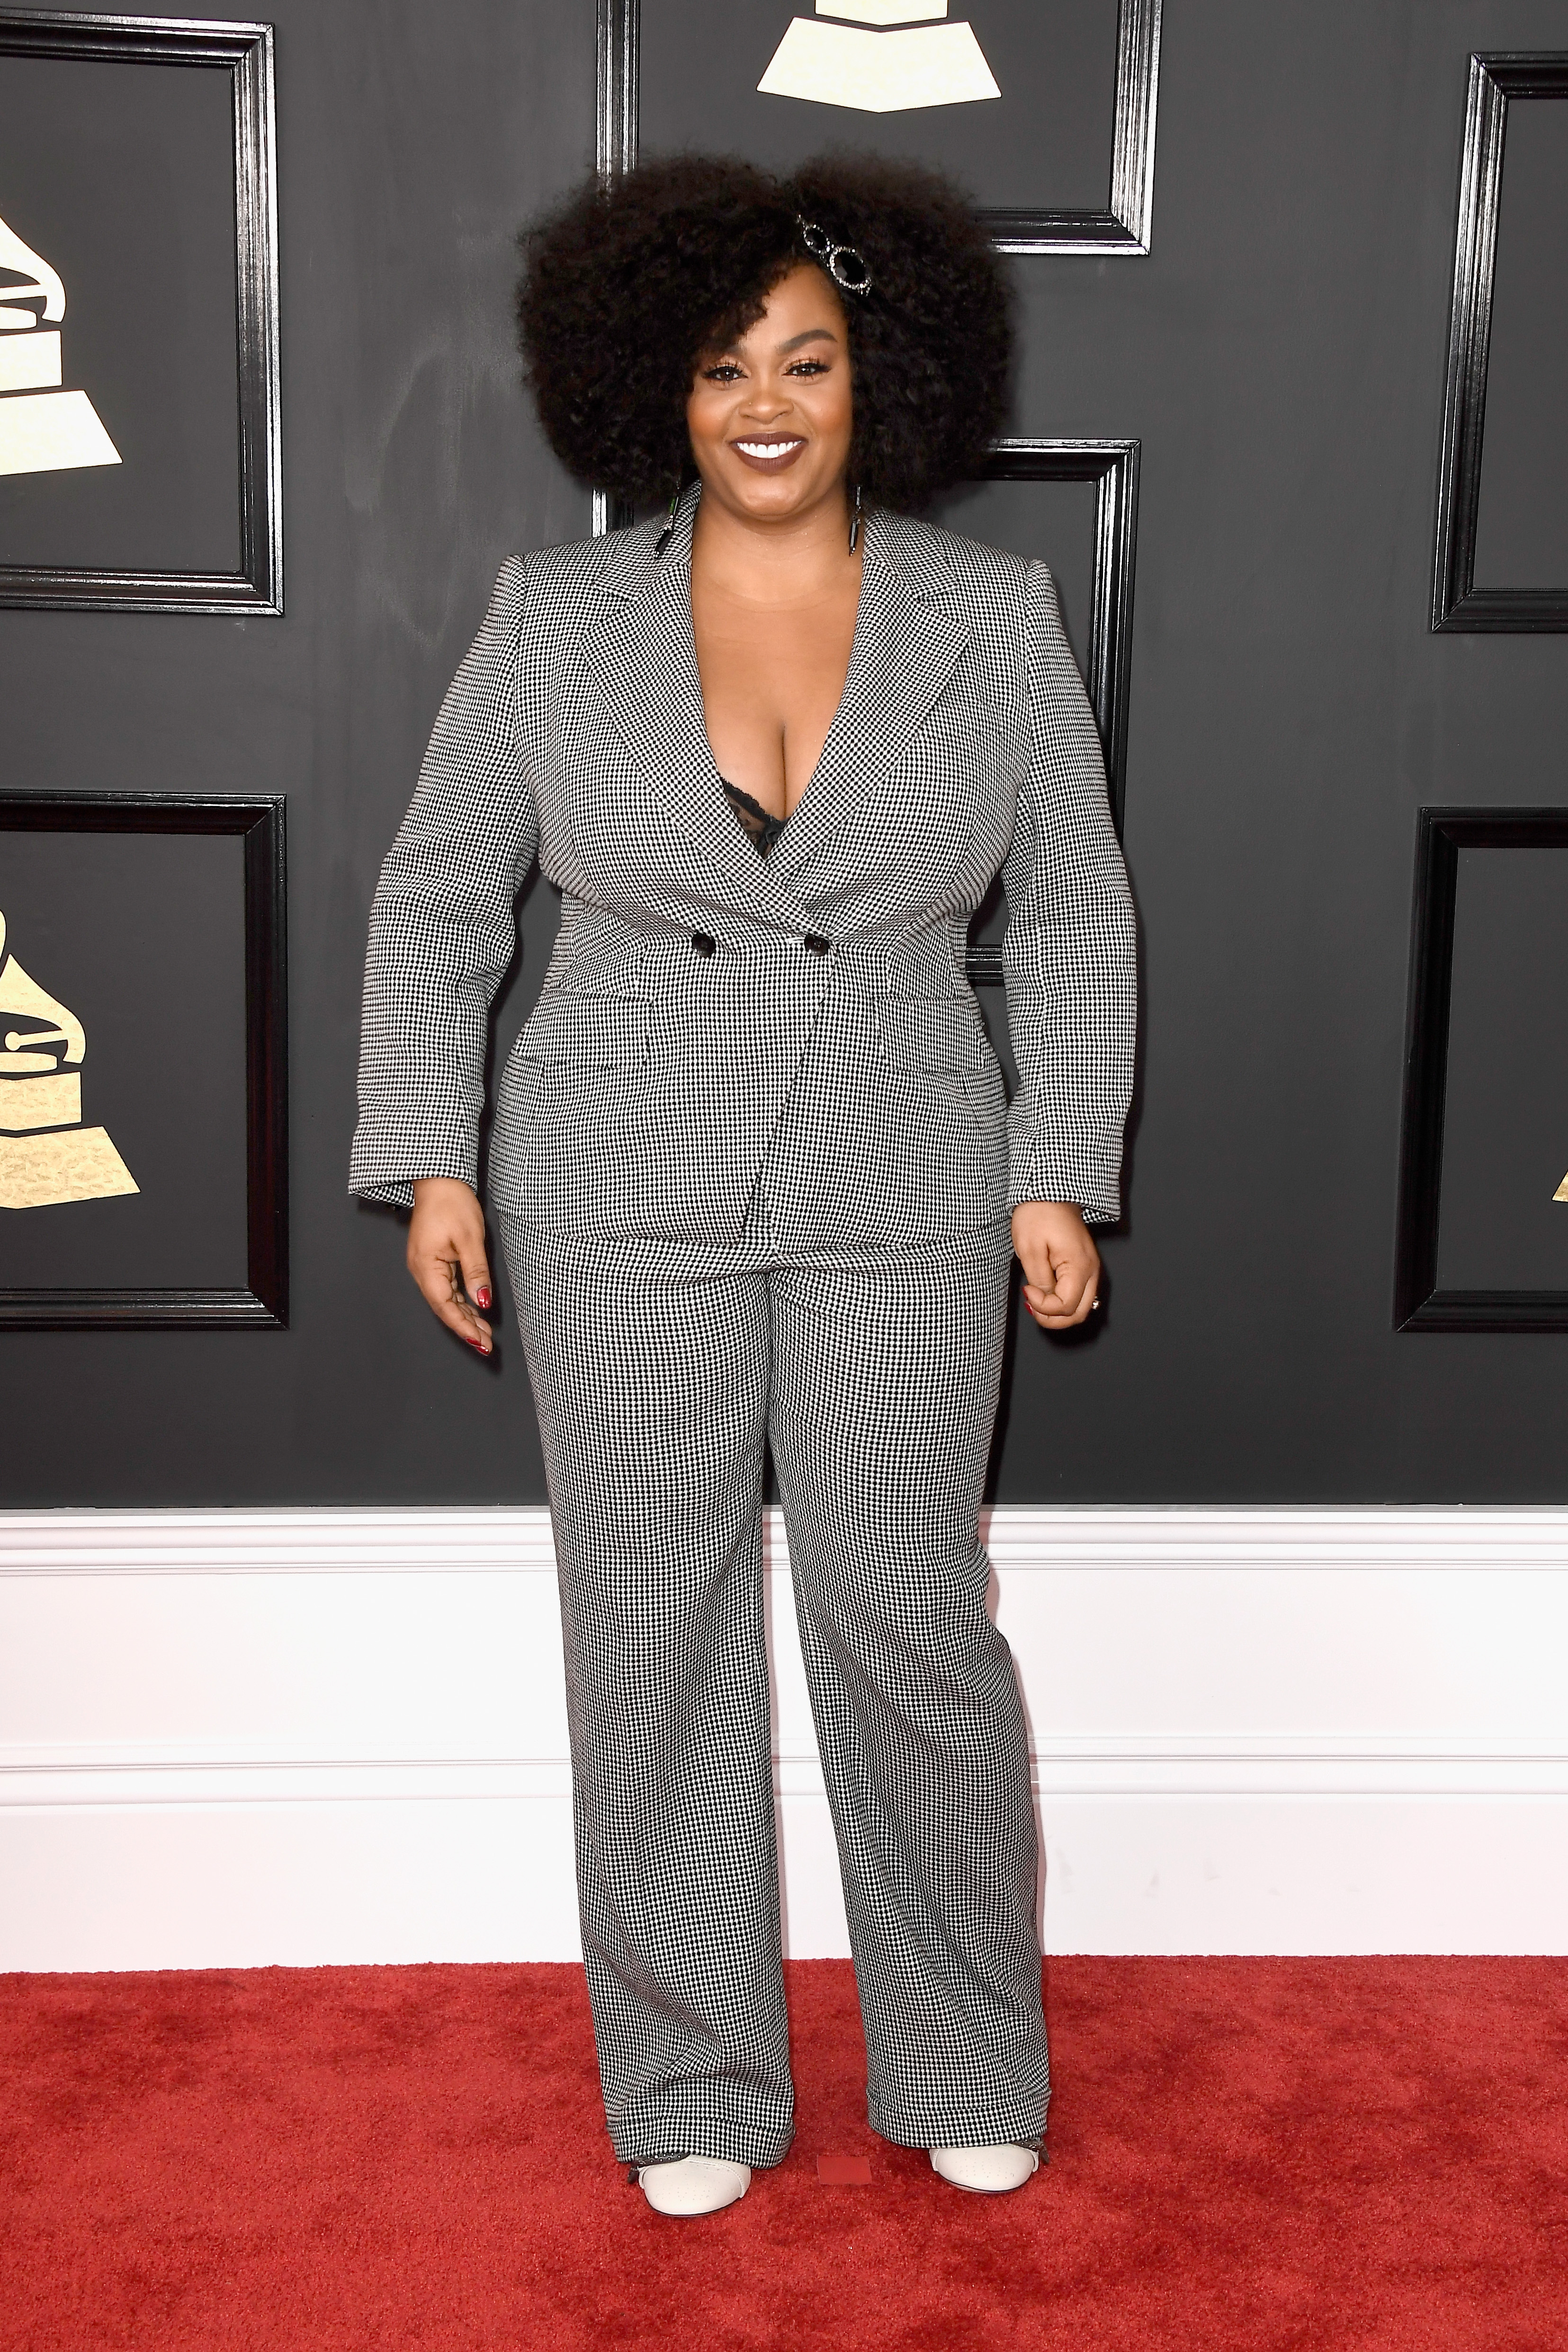 Jill Scott attends The 59th Grammy Awards at Staples Center on February 12, 2017, in Los Angeles, California. | Source: Getty Images